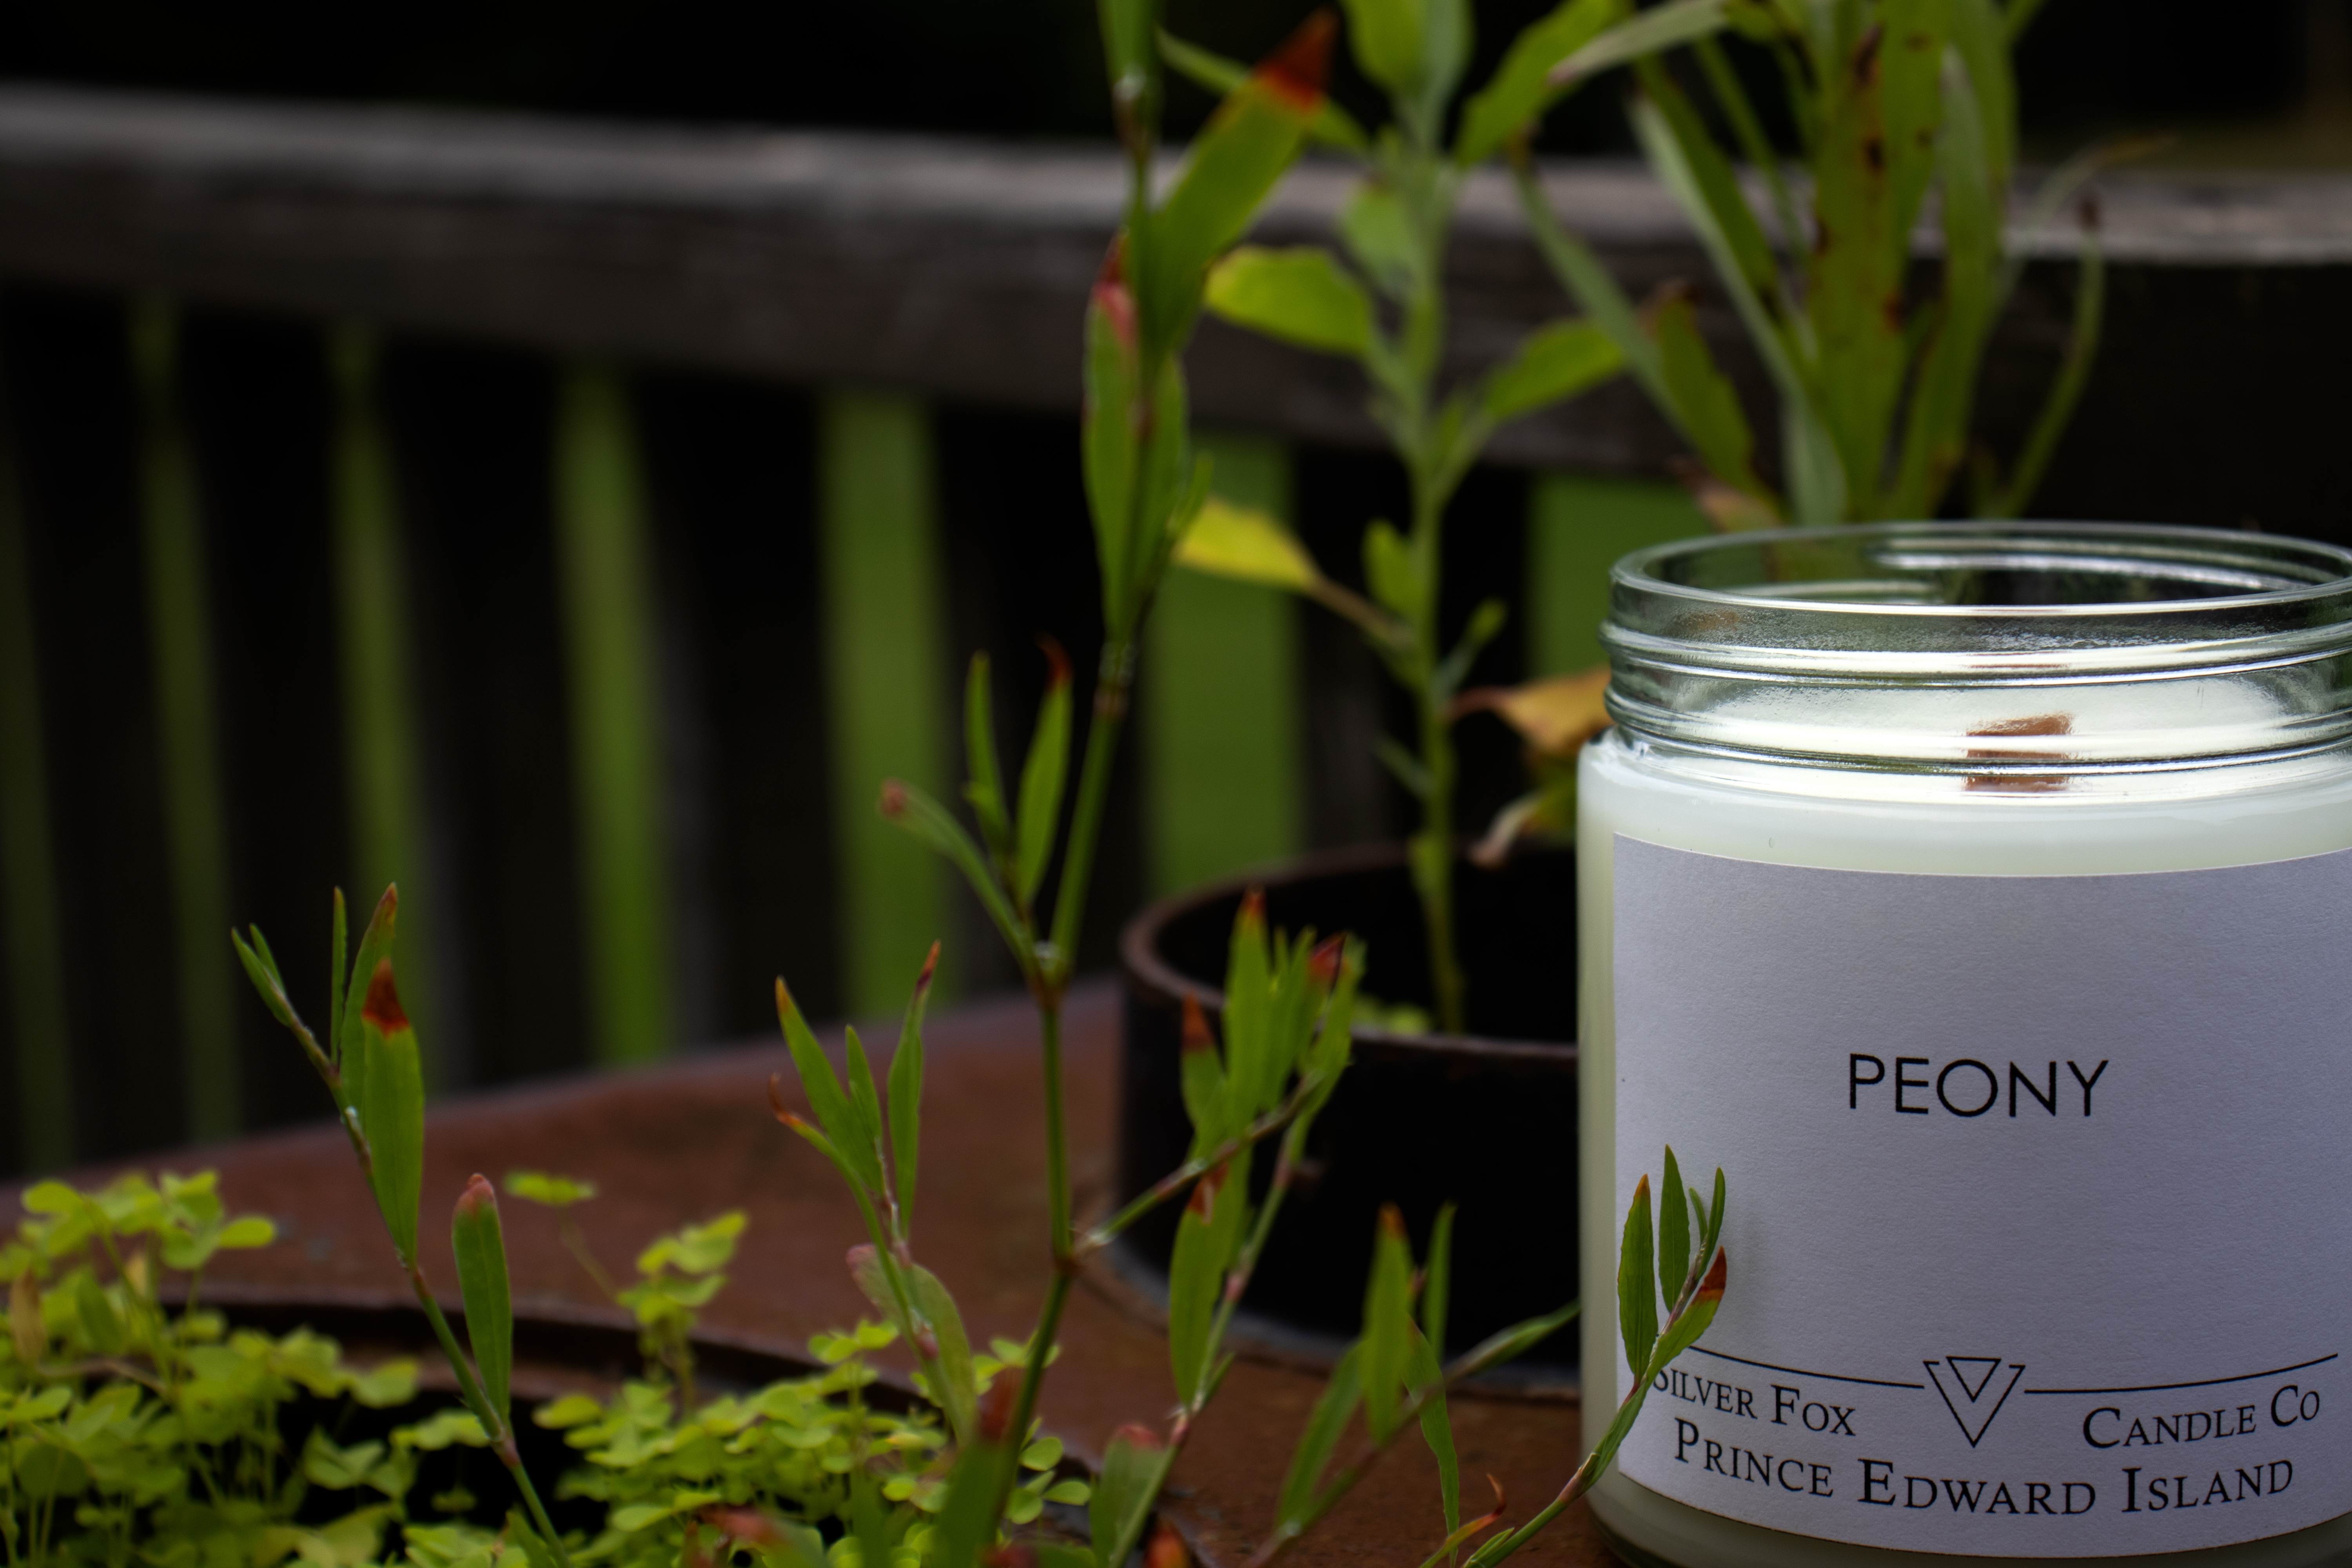 Peony Scented Soy Wax Candle from the Silver Fox Candle Company - Stove Pipe